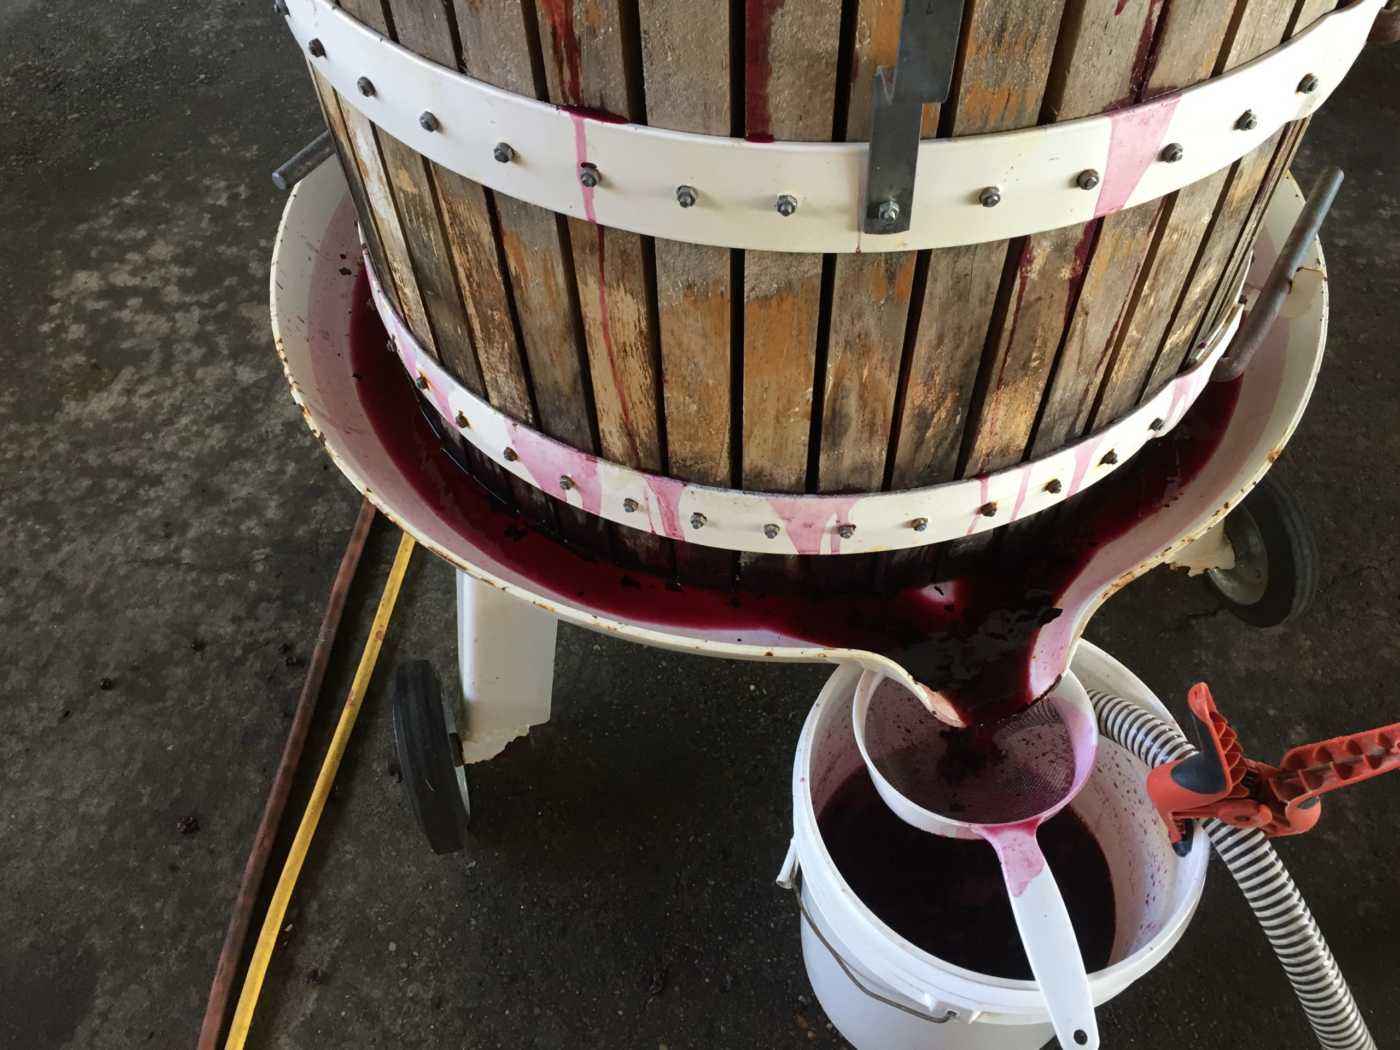 Winemaking with the fruit press